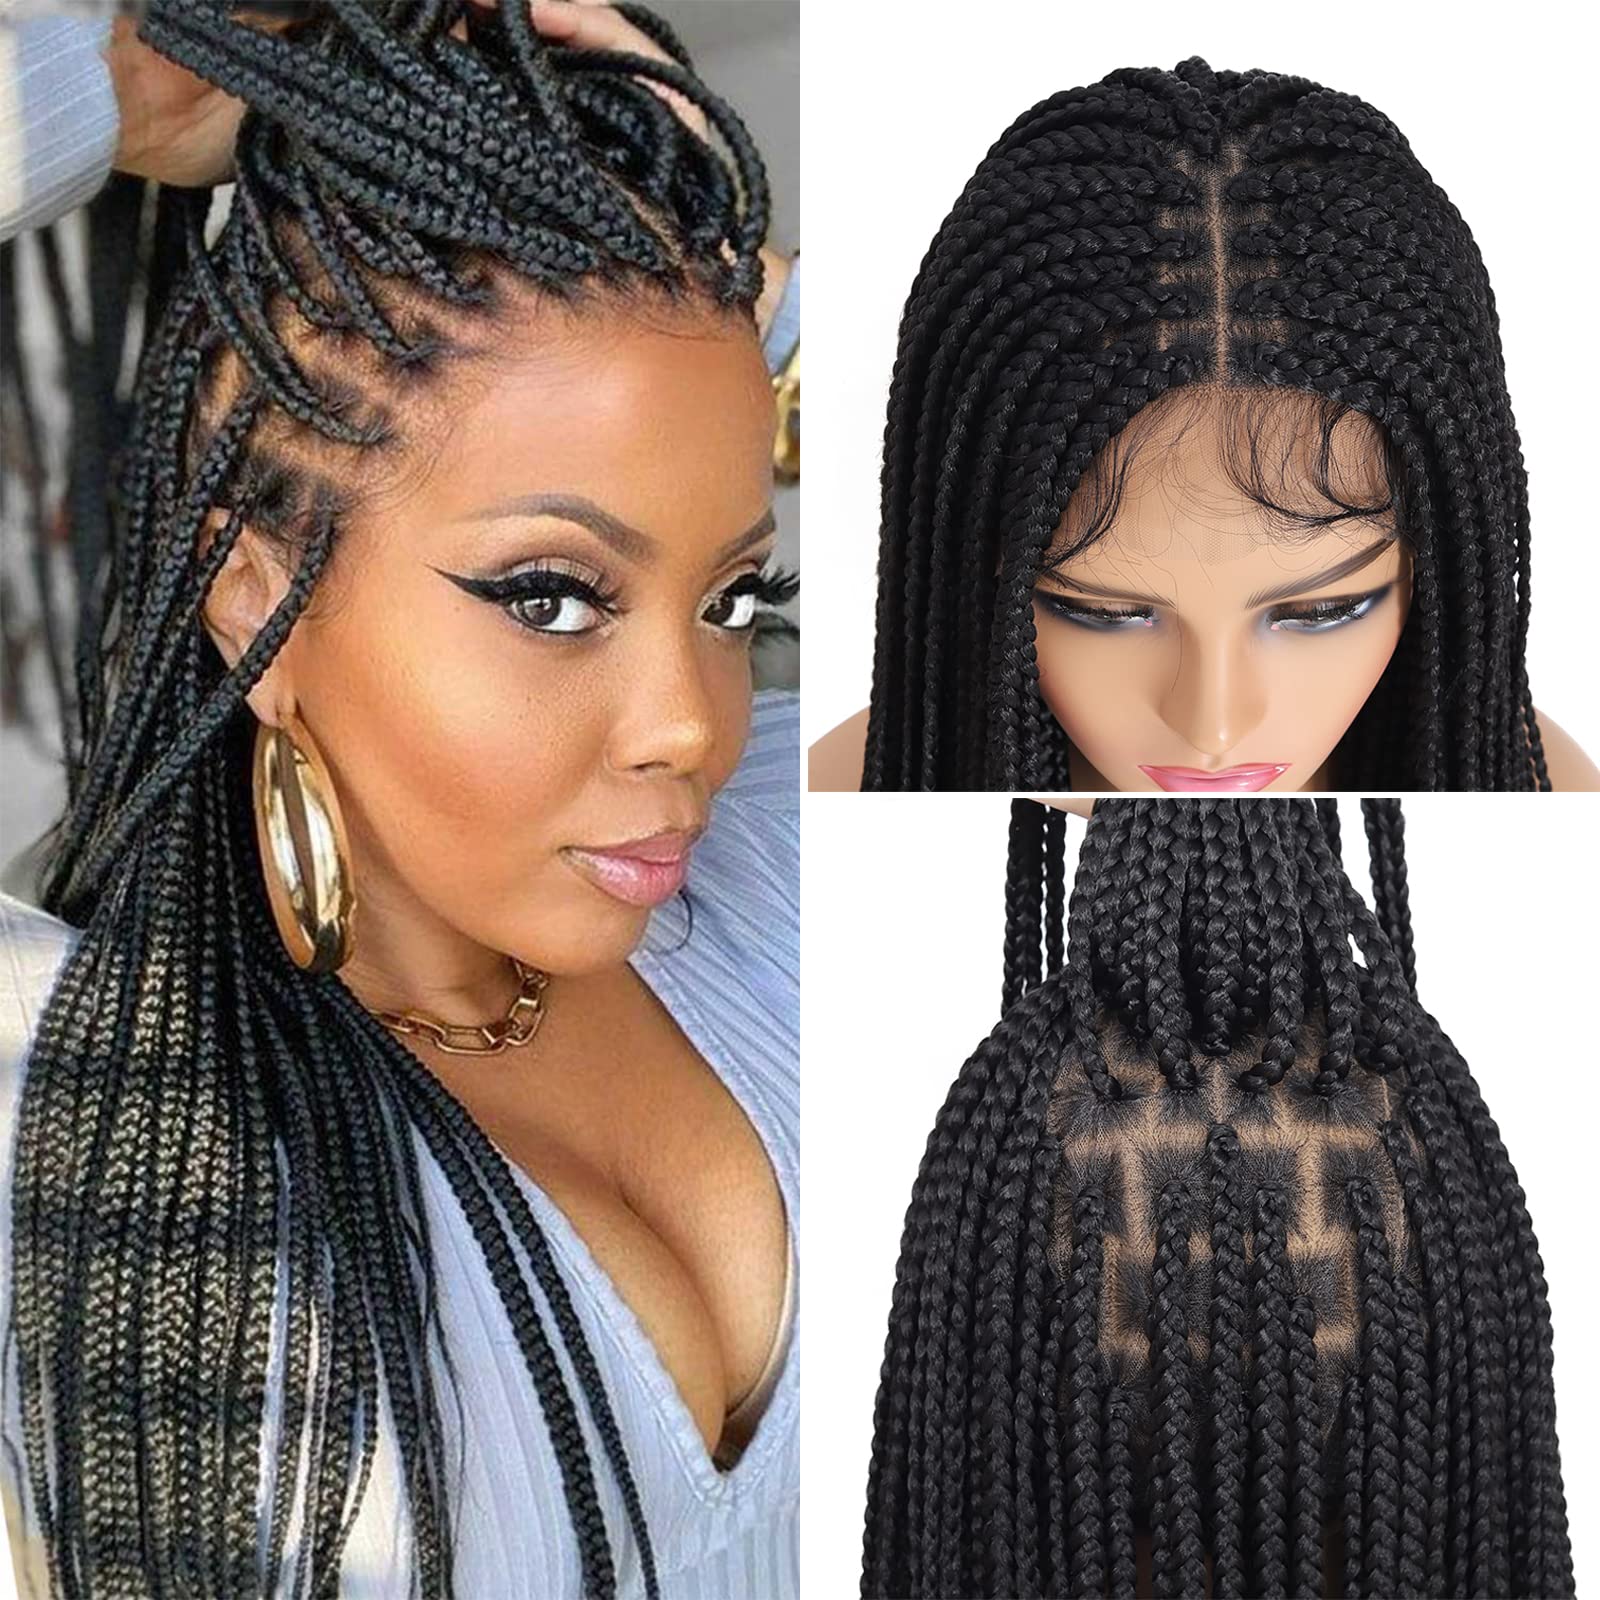 bismanhair Braided Wigs for Black Women 360 Full Lace Box Braid Wig with Baby  Hair Synthetic